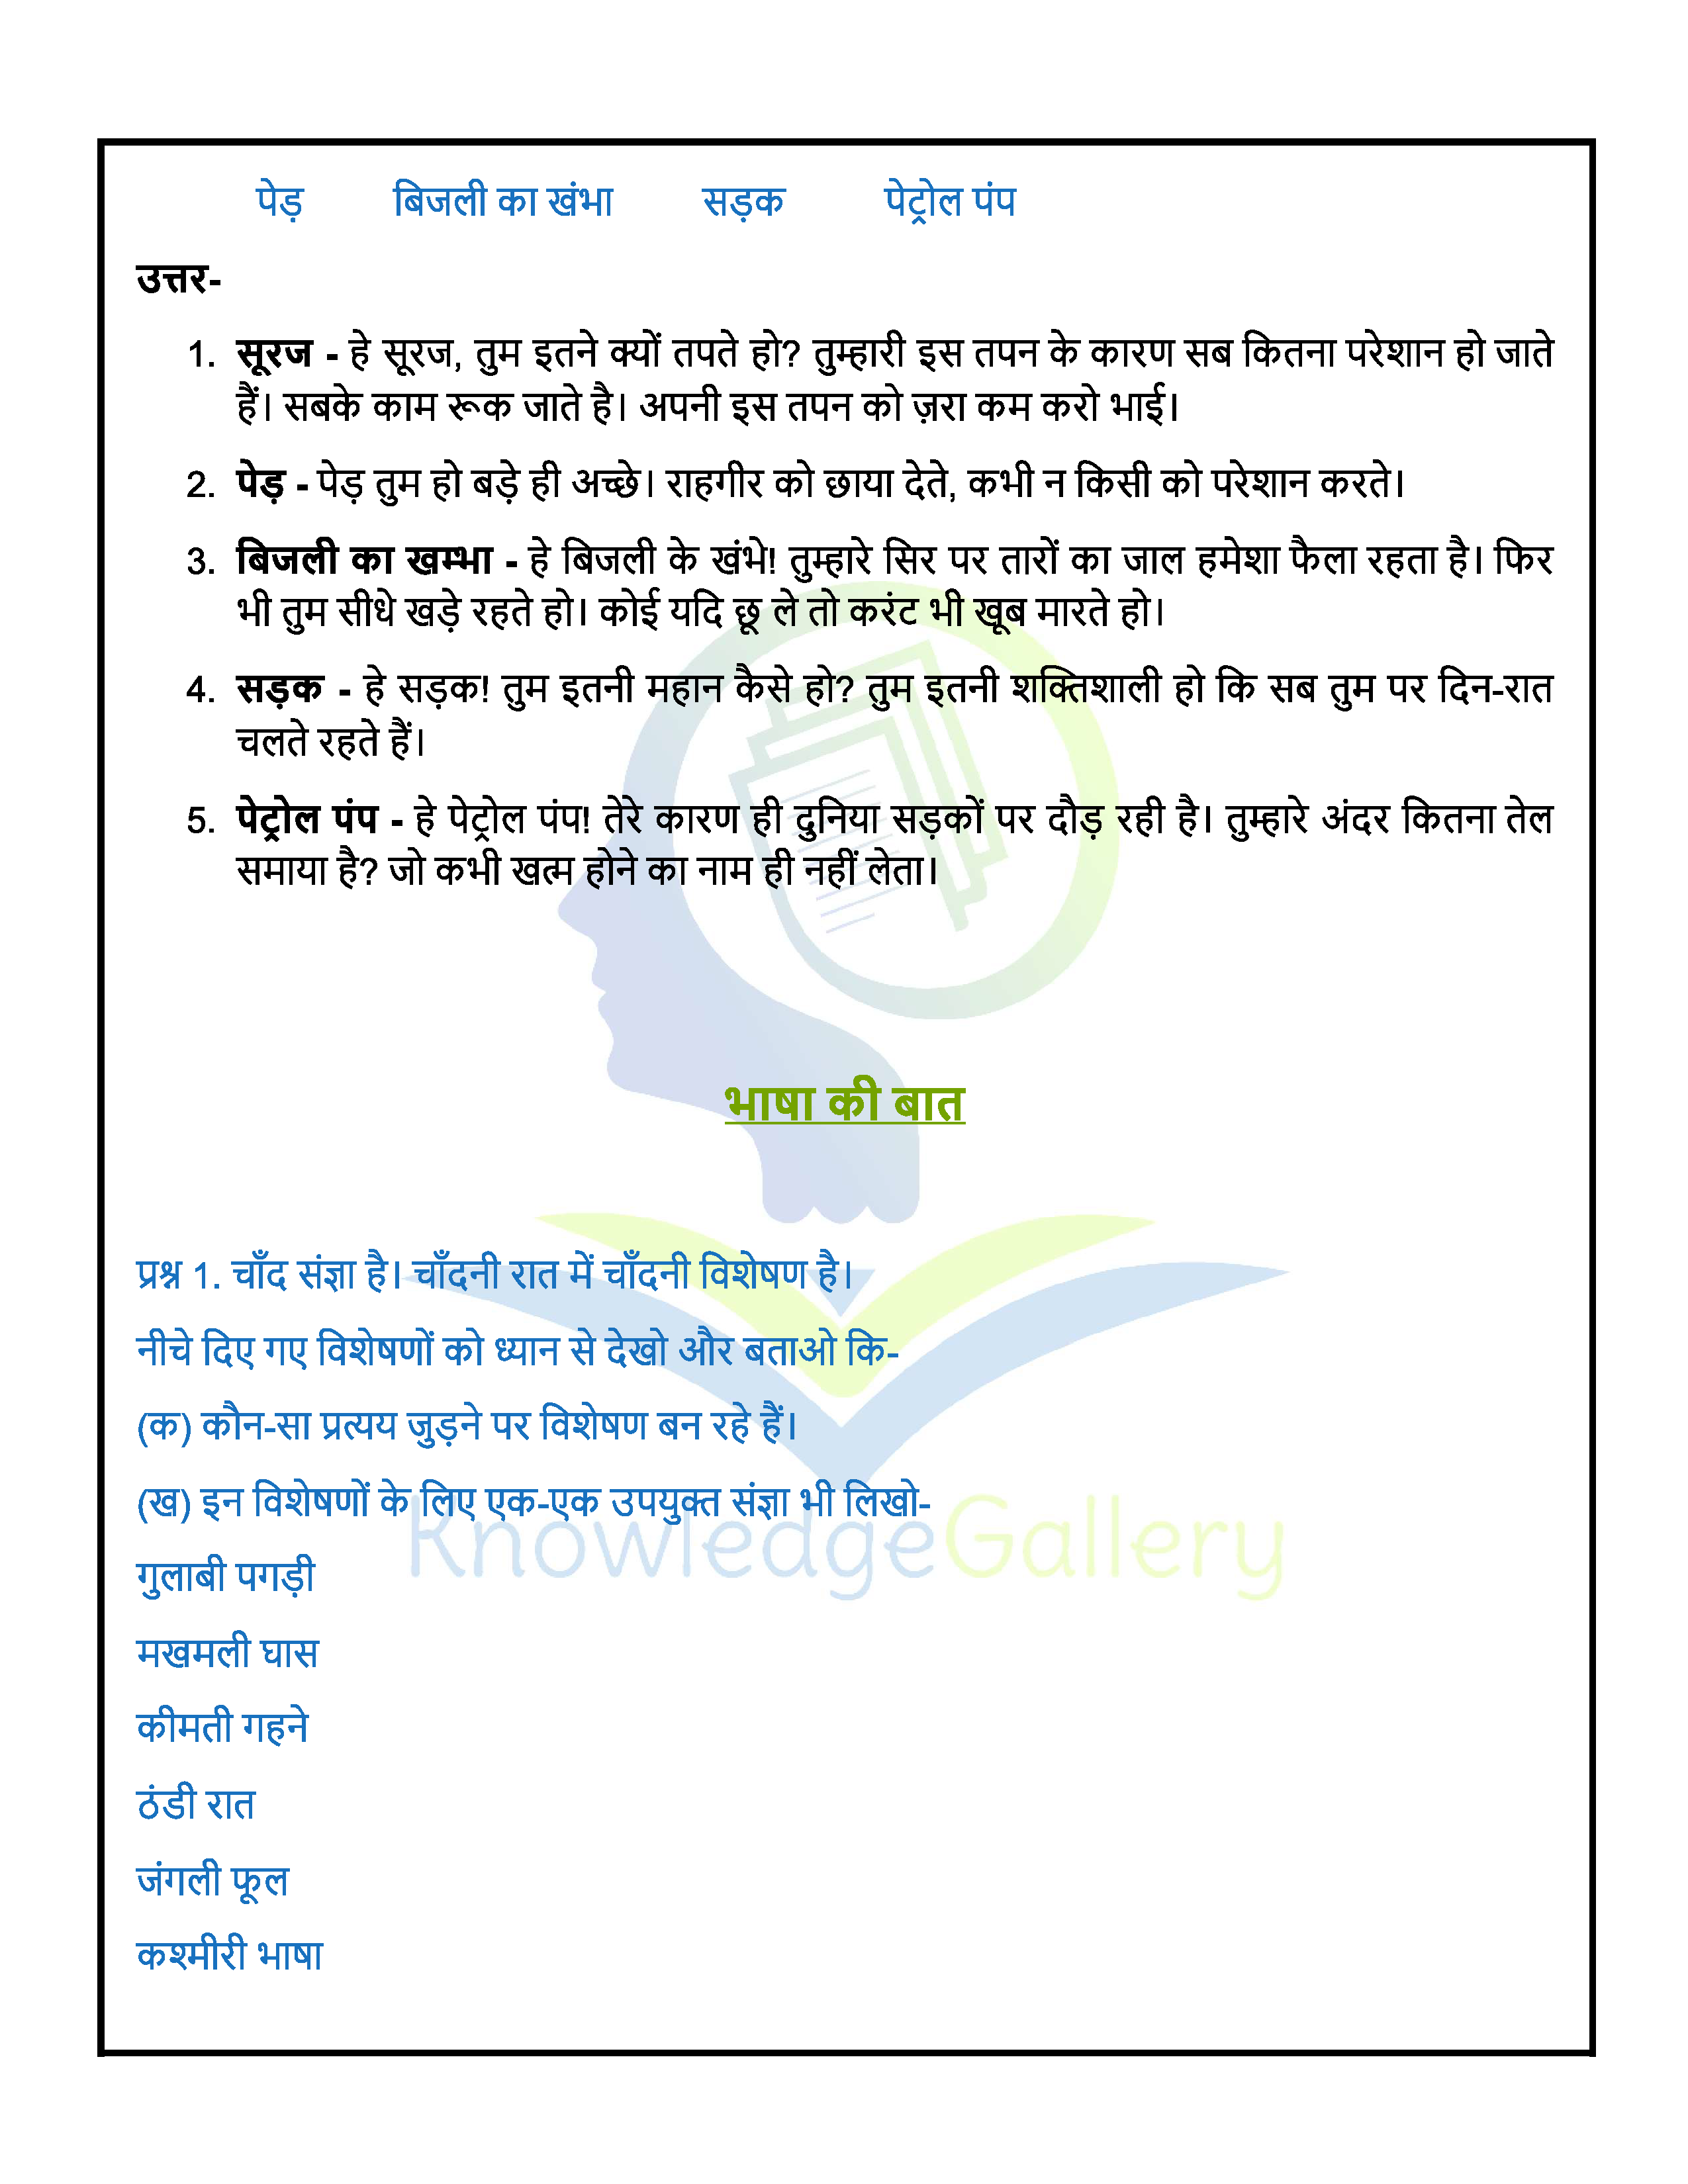 NCERT Solution For Class 6 Hindi Chapter 4 part 4